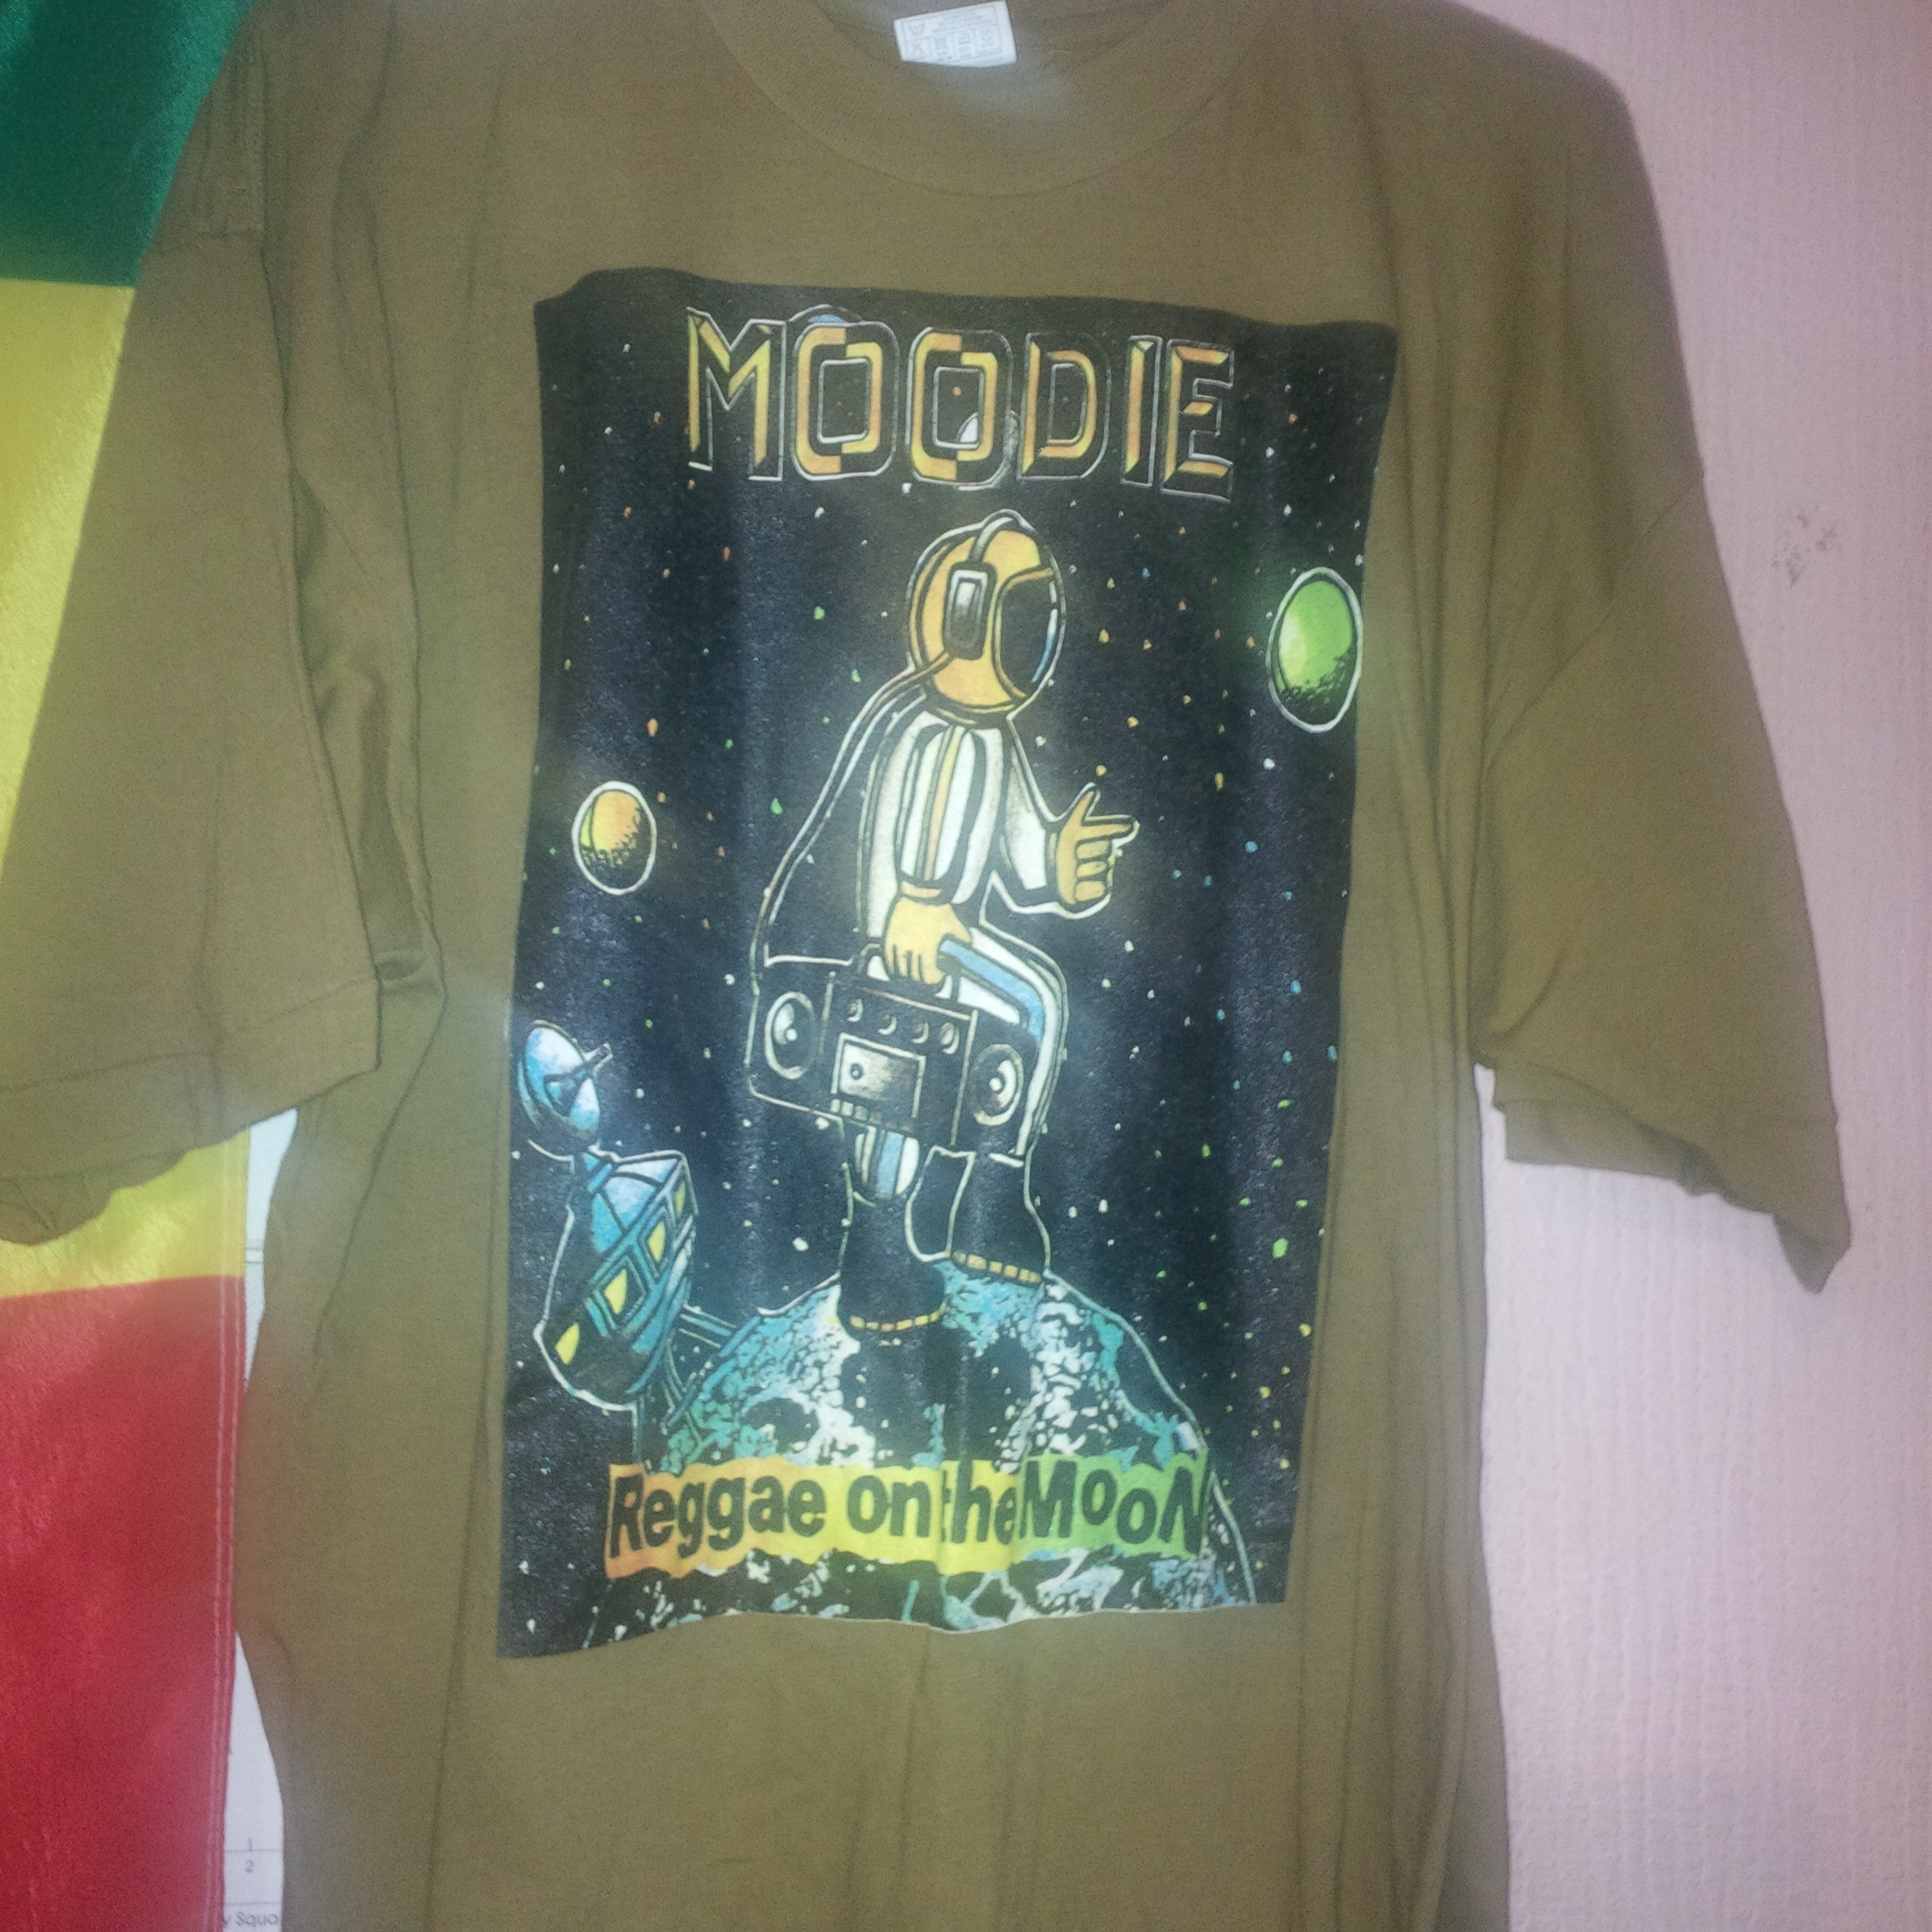 Reggae On The Moon Tee Shirt Moodie Music - one punch man t shirt roblox roblox robux lucky patcher